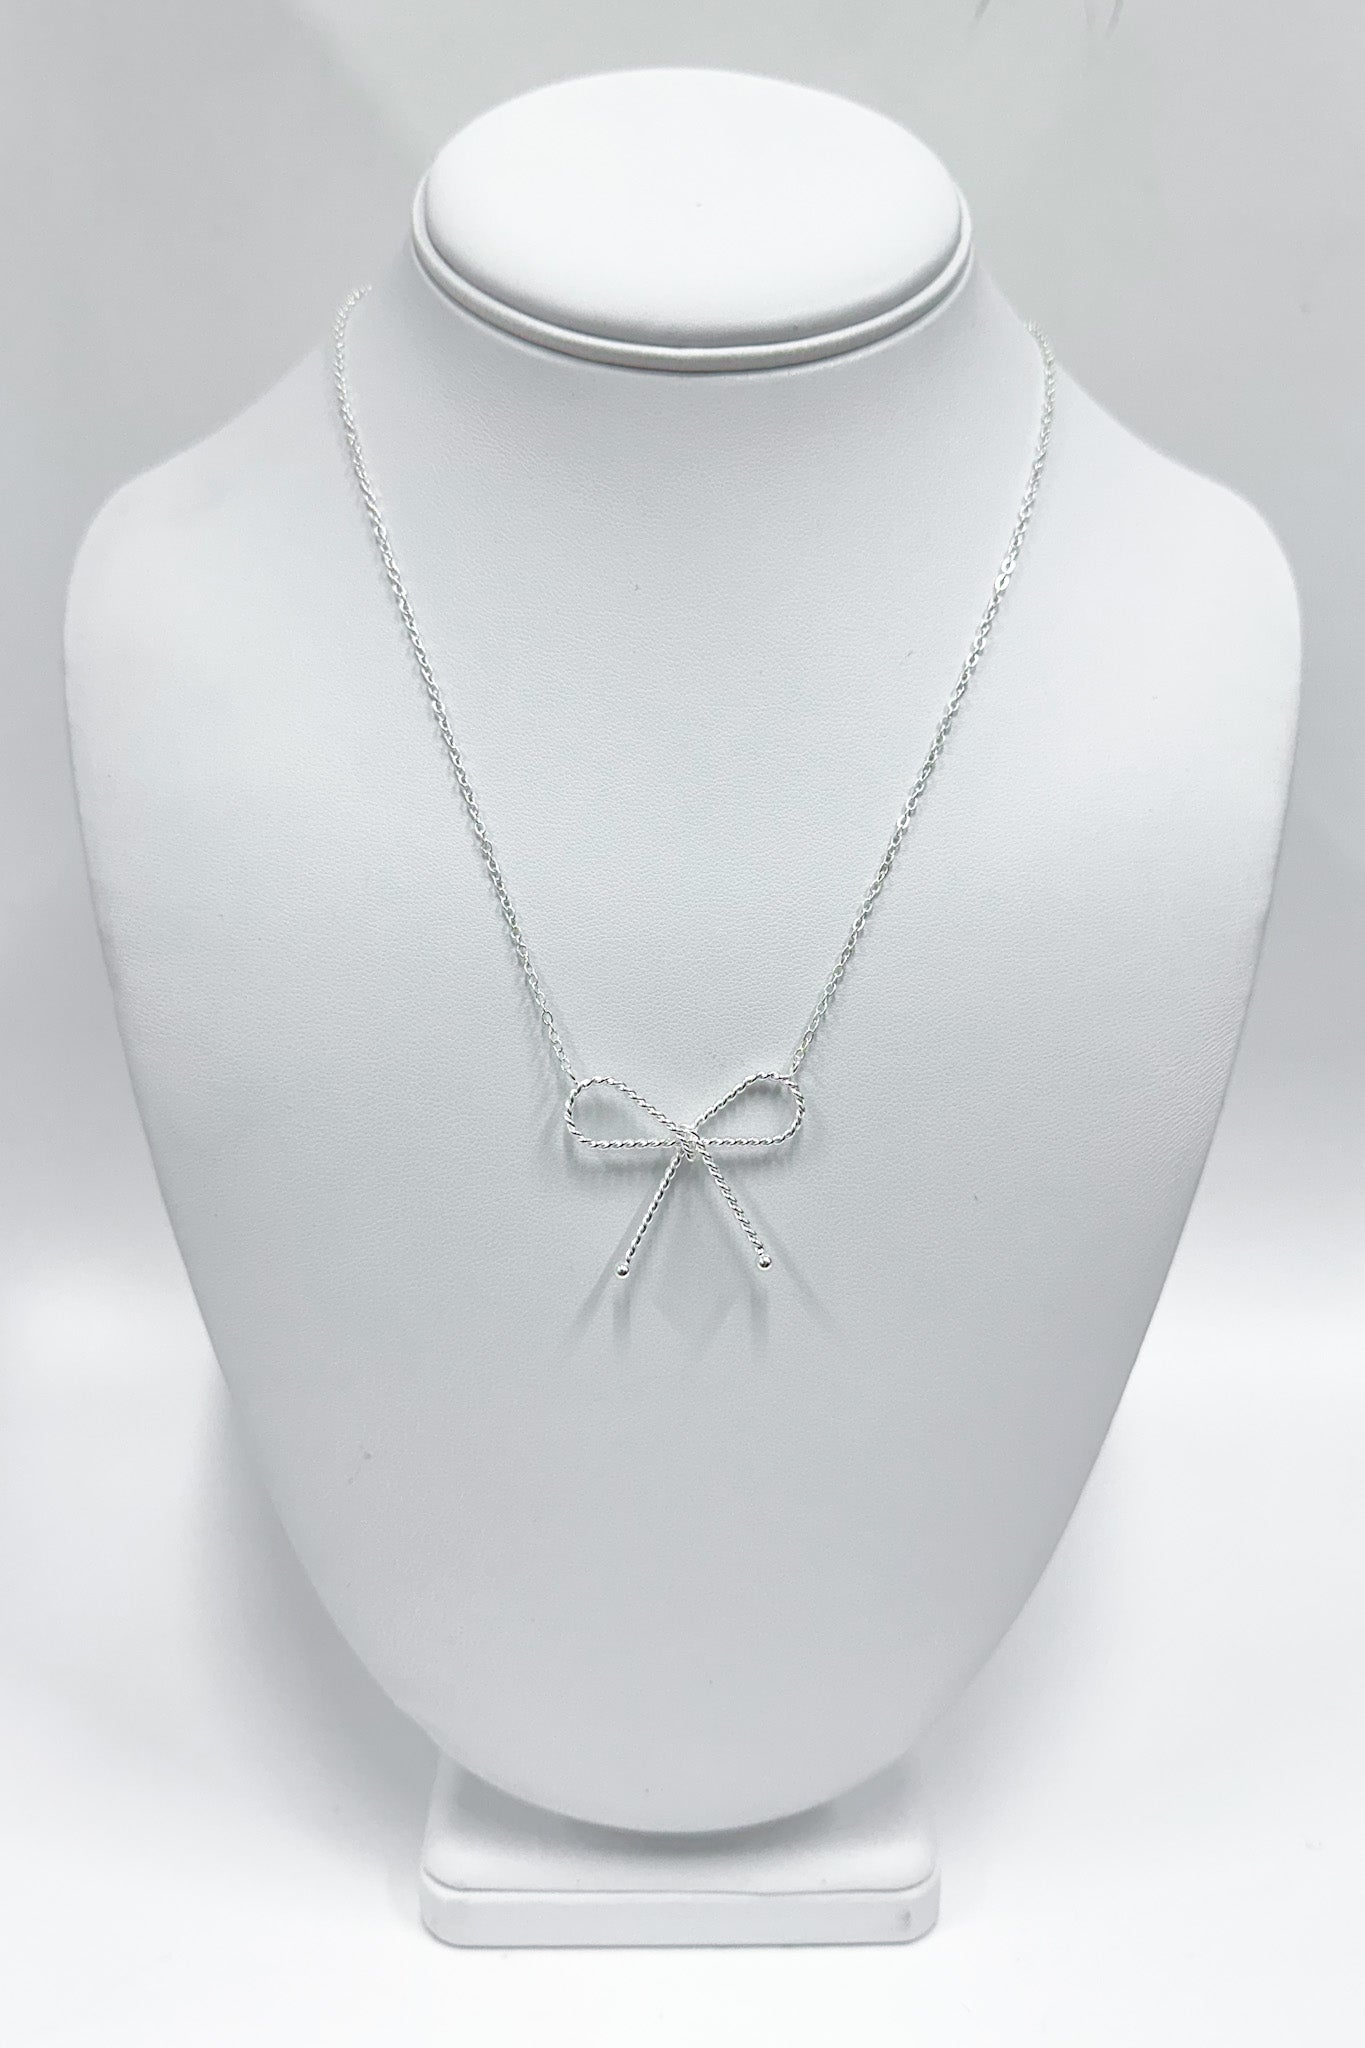  Perfectly Darling Bow Necklace - Madison and Mallory